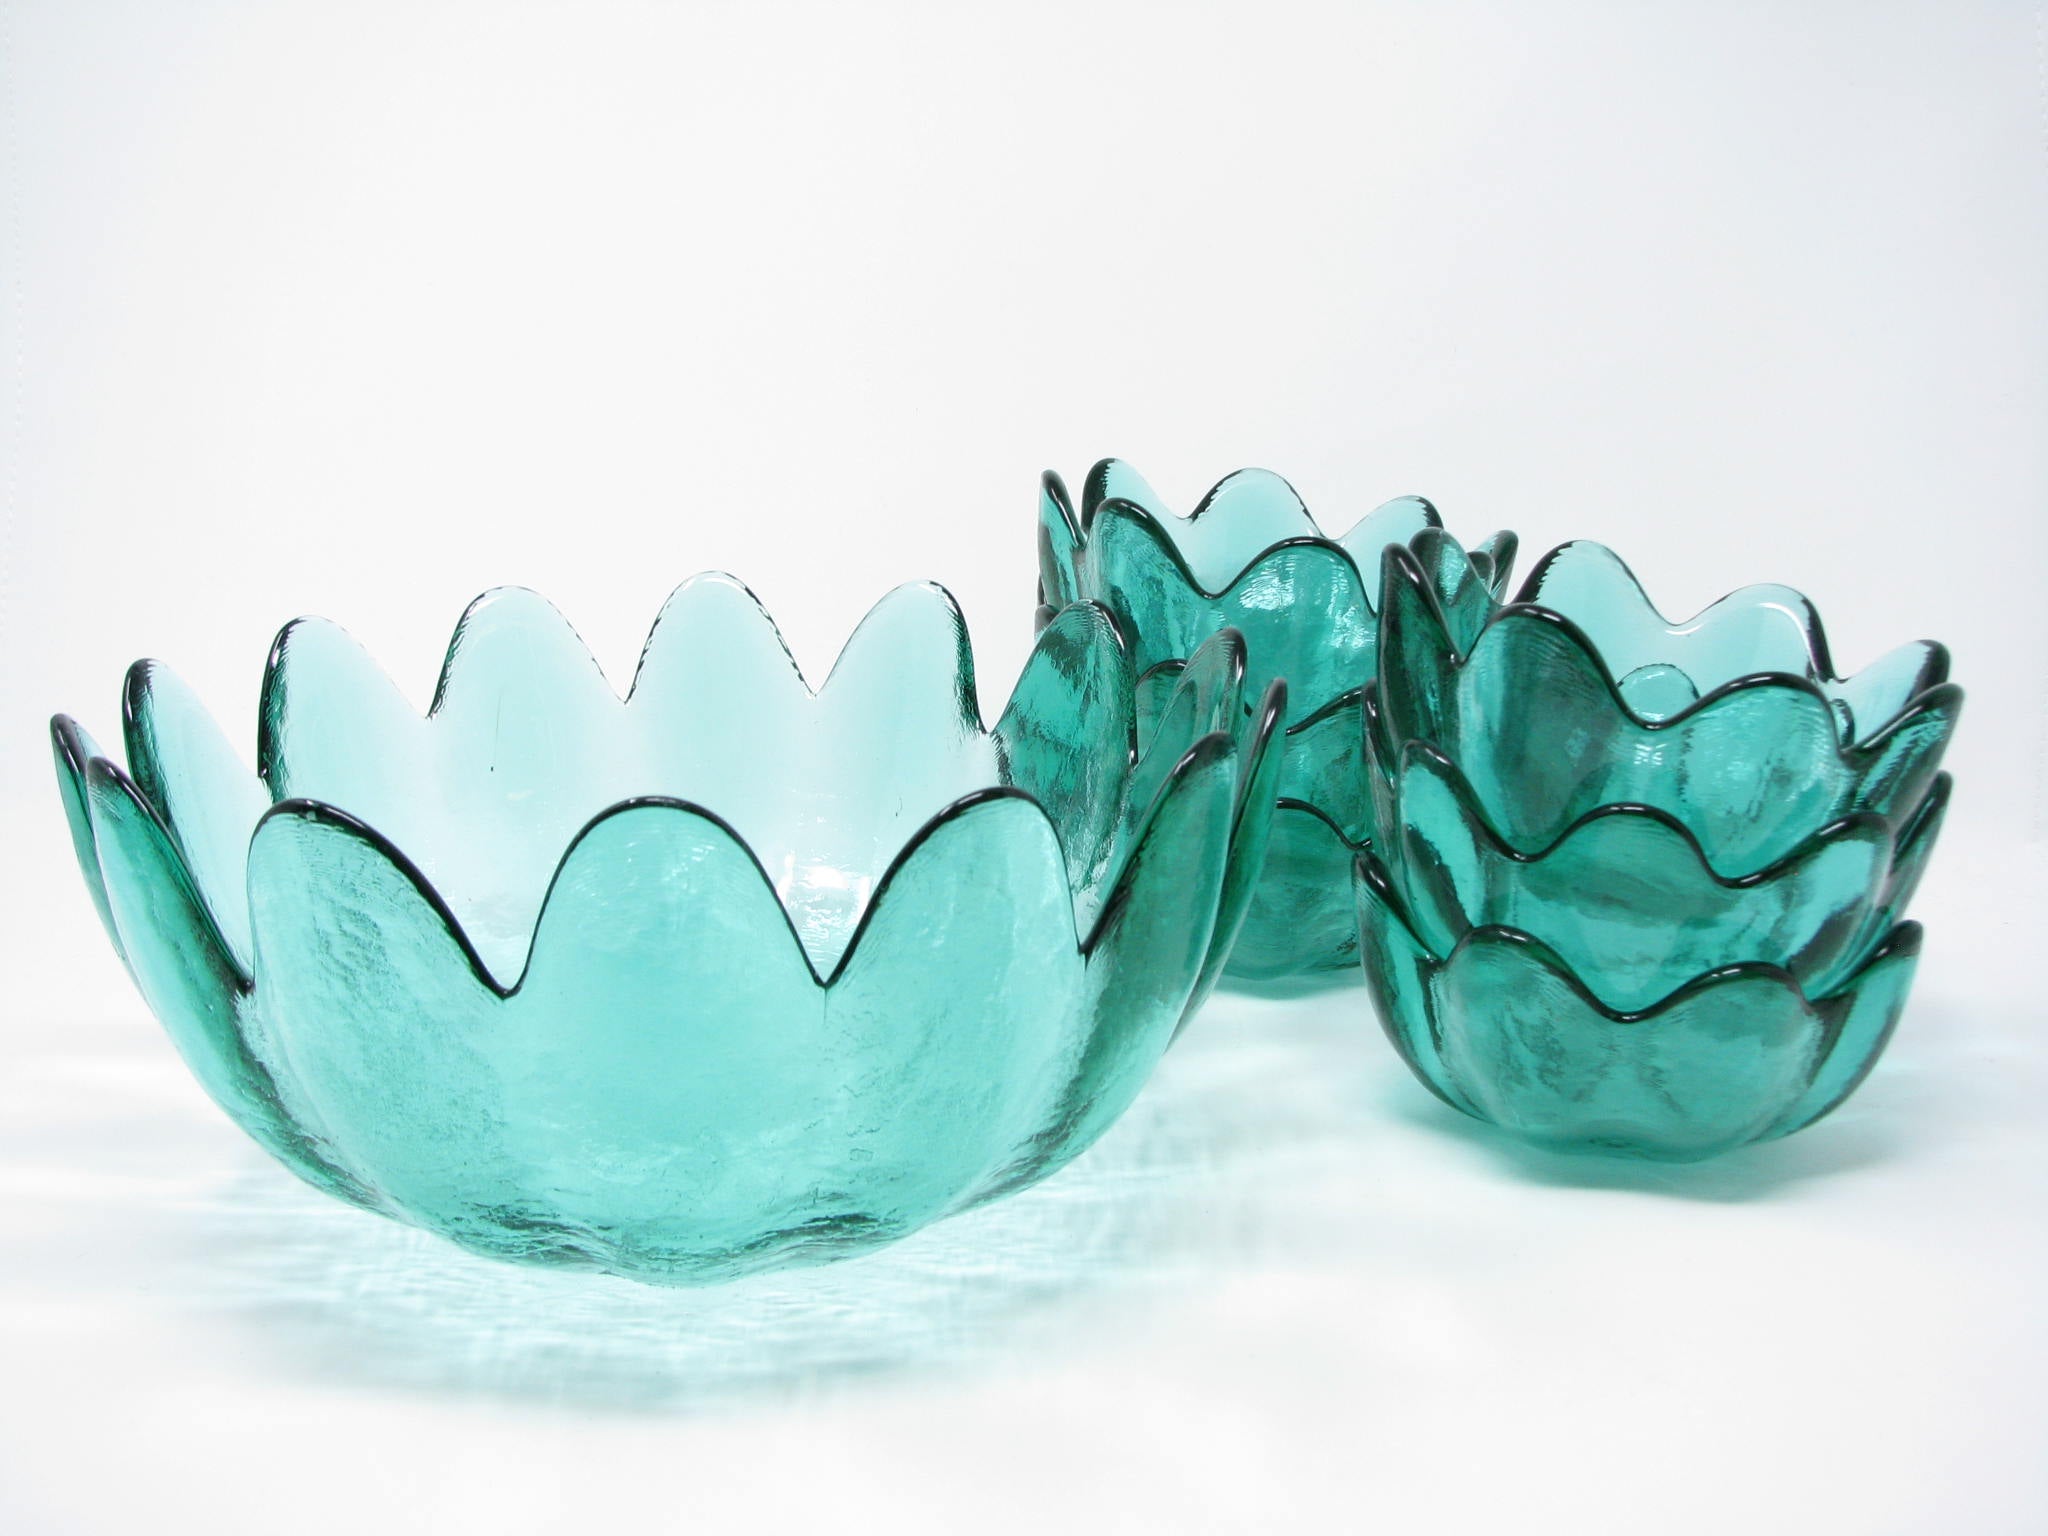 edgebrookhouse - Vintage Blenko Glass Lotus Serving Bowl Set in Sea Green Designed by Wayne Husted - 7 Pieces